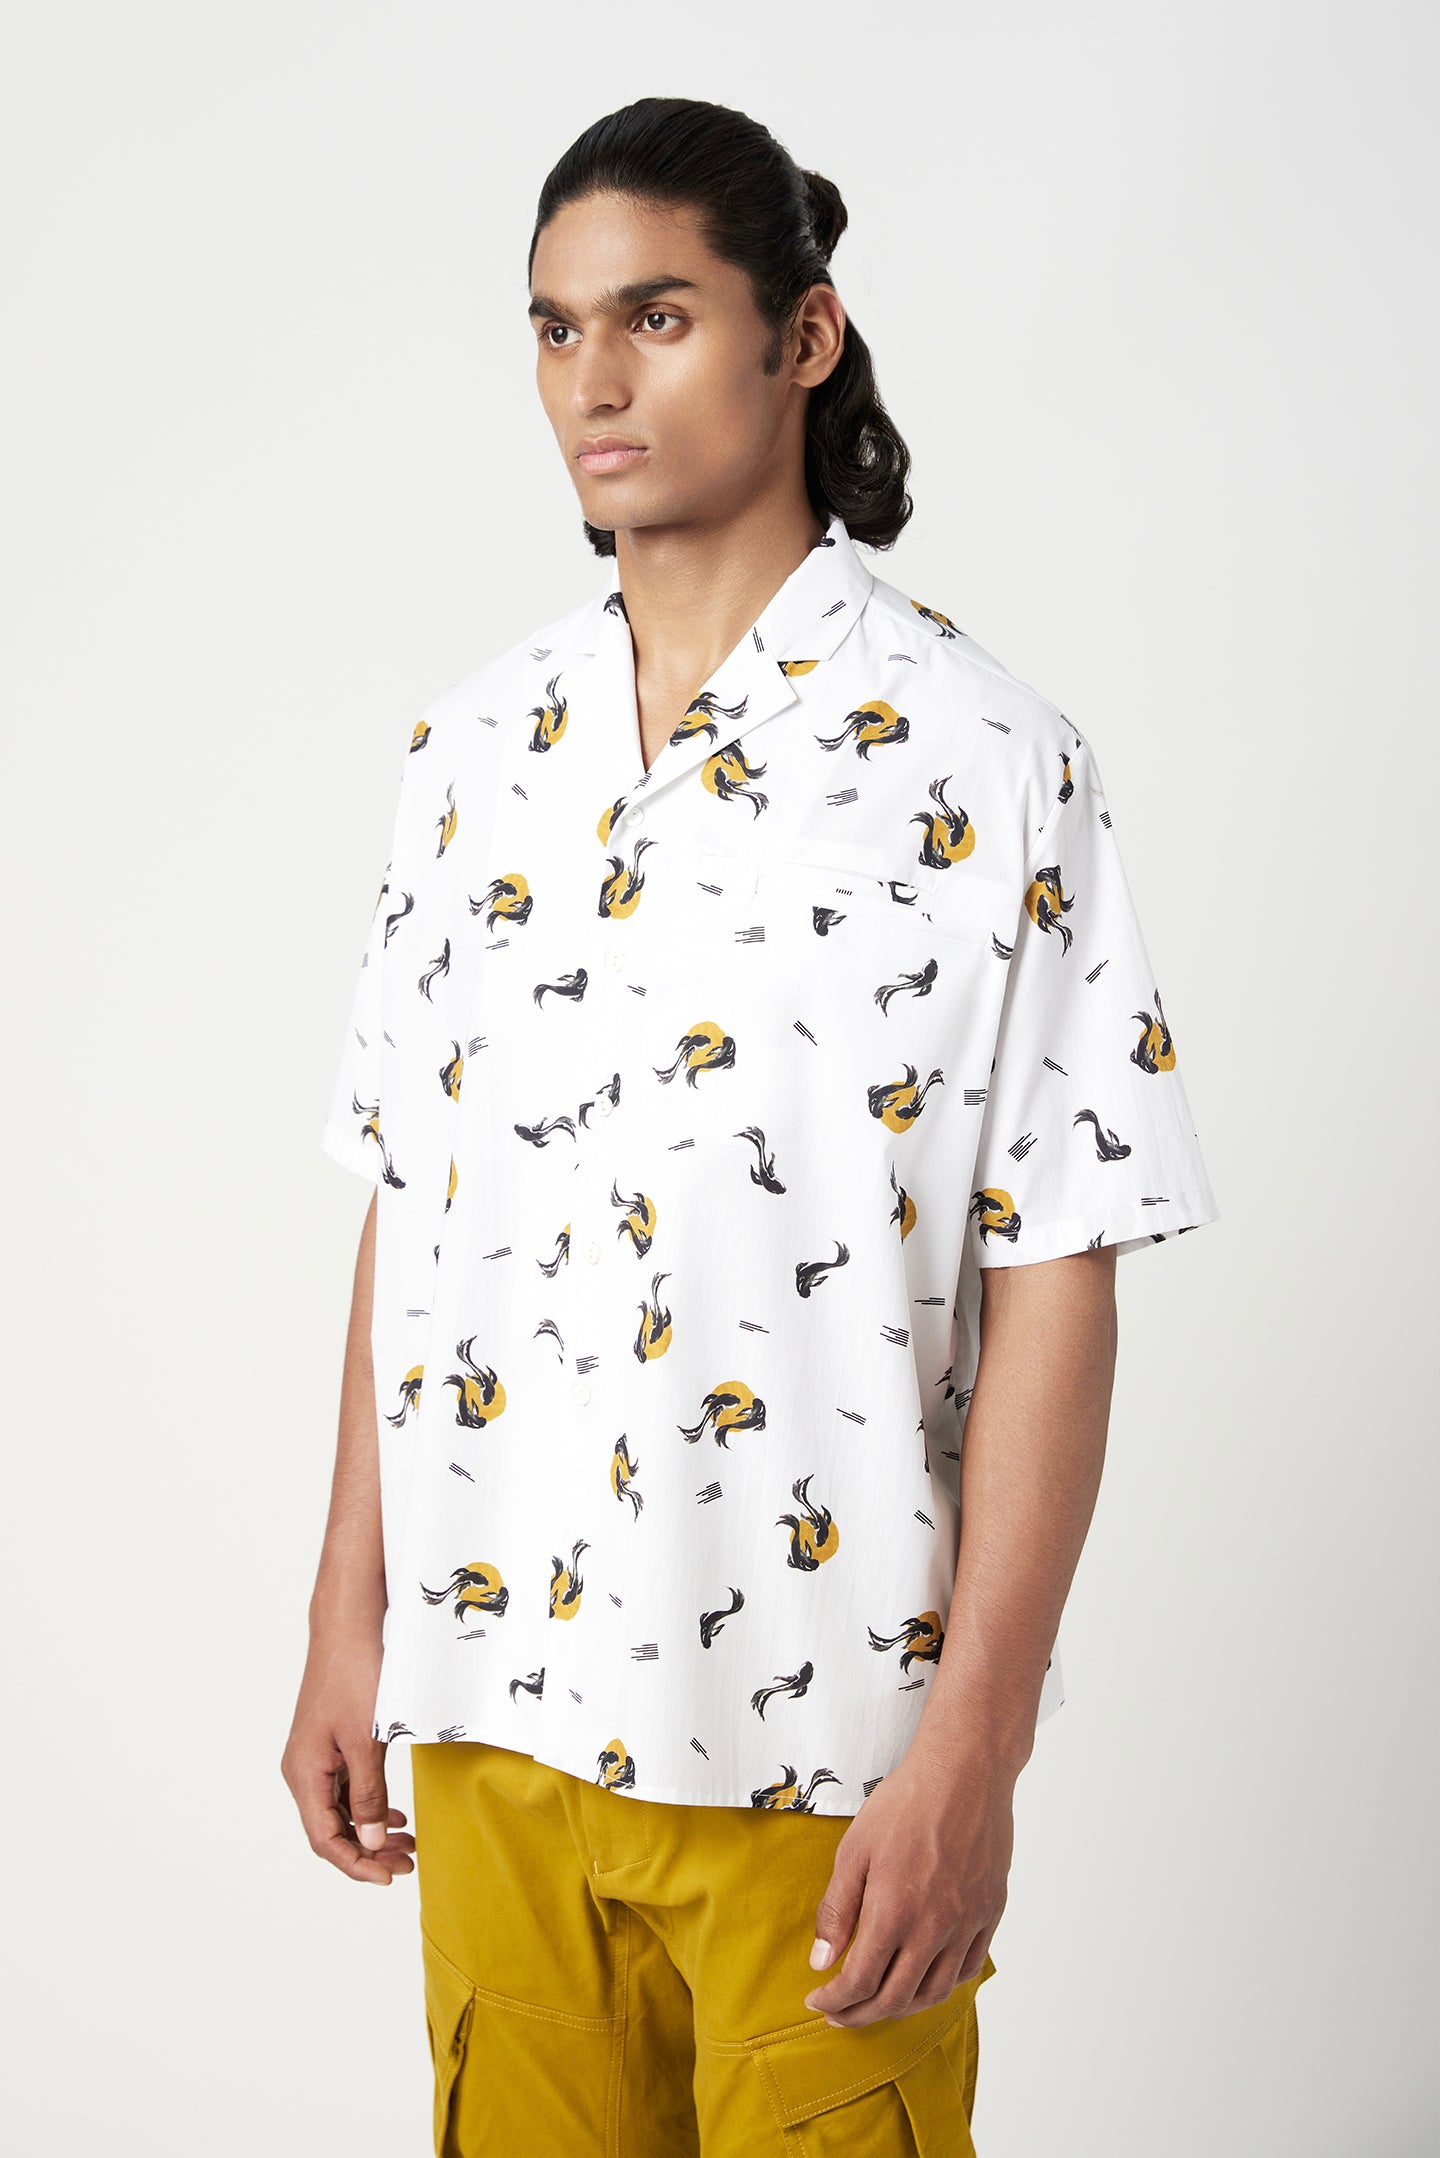 Easy Fit Half Sleeve Shirt in an All-Over Fish Print